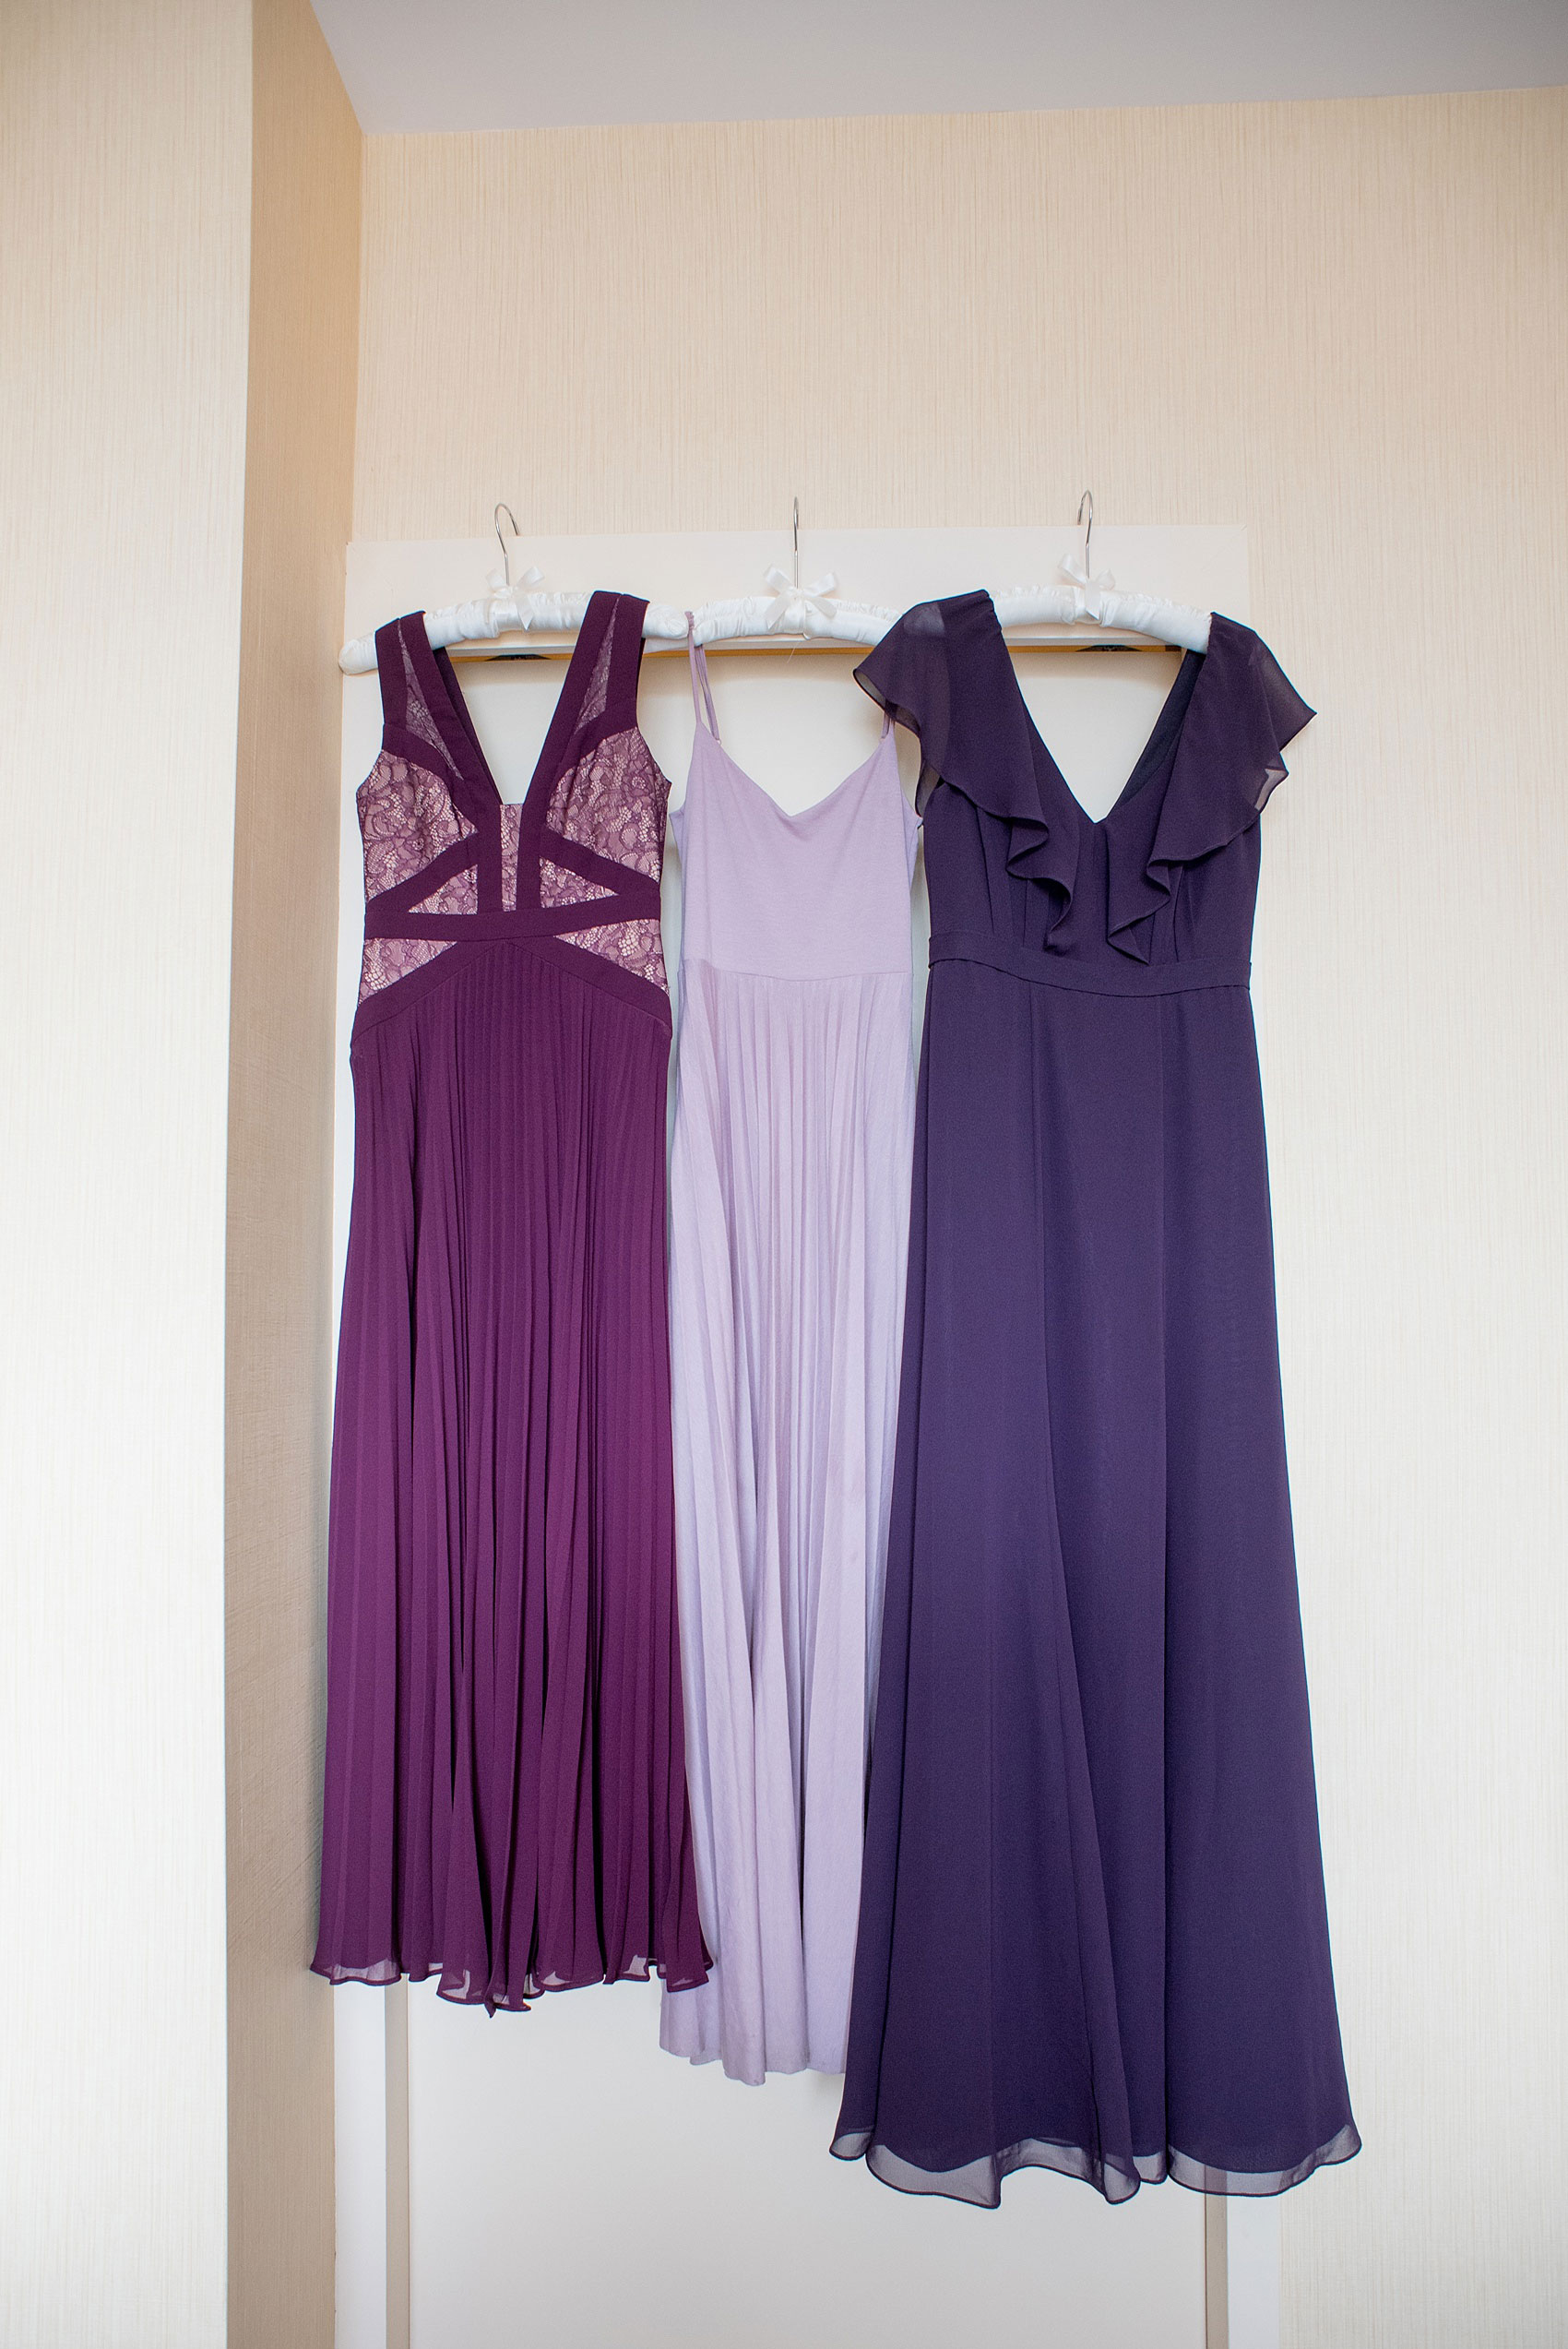 Mikkel Paige Photography photos of a NYC wedding at Tribeca Rooftop. The bridesmaids wore three different shades of purple.